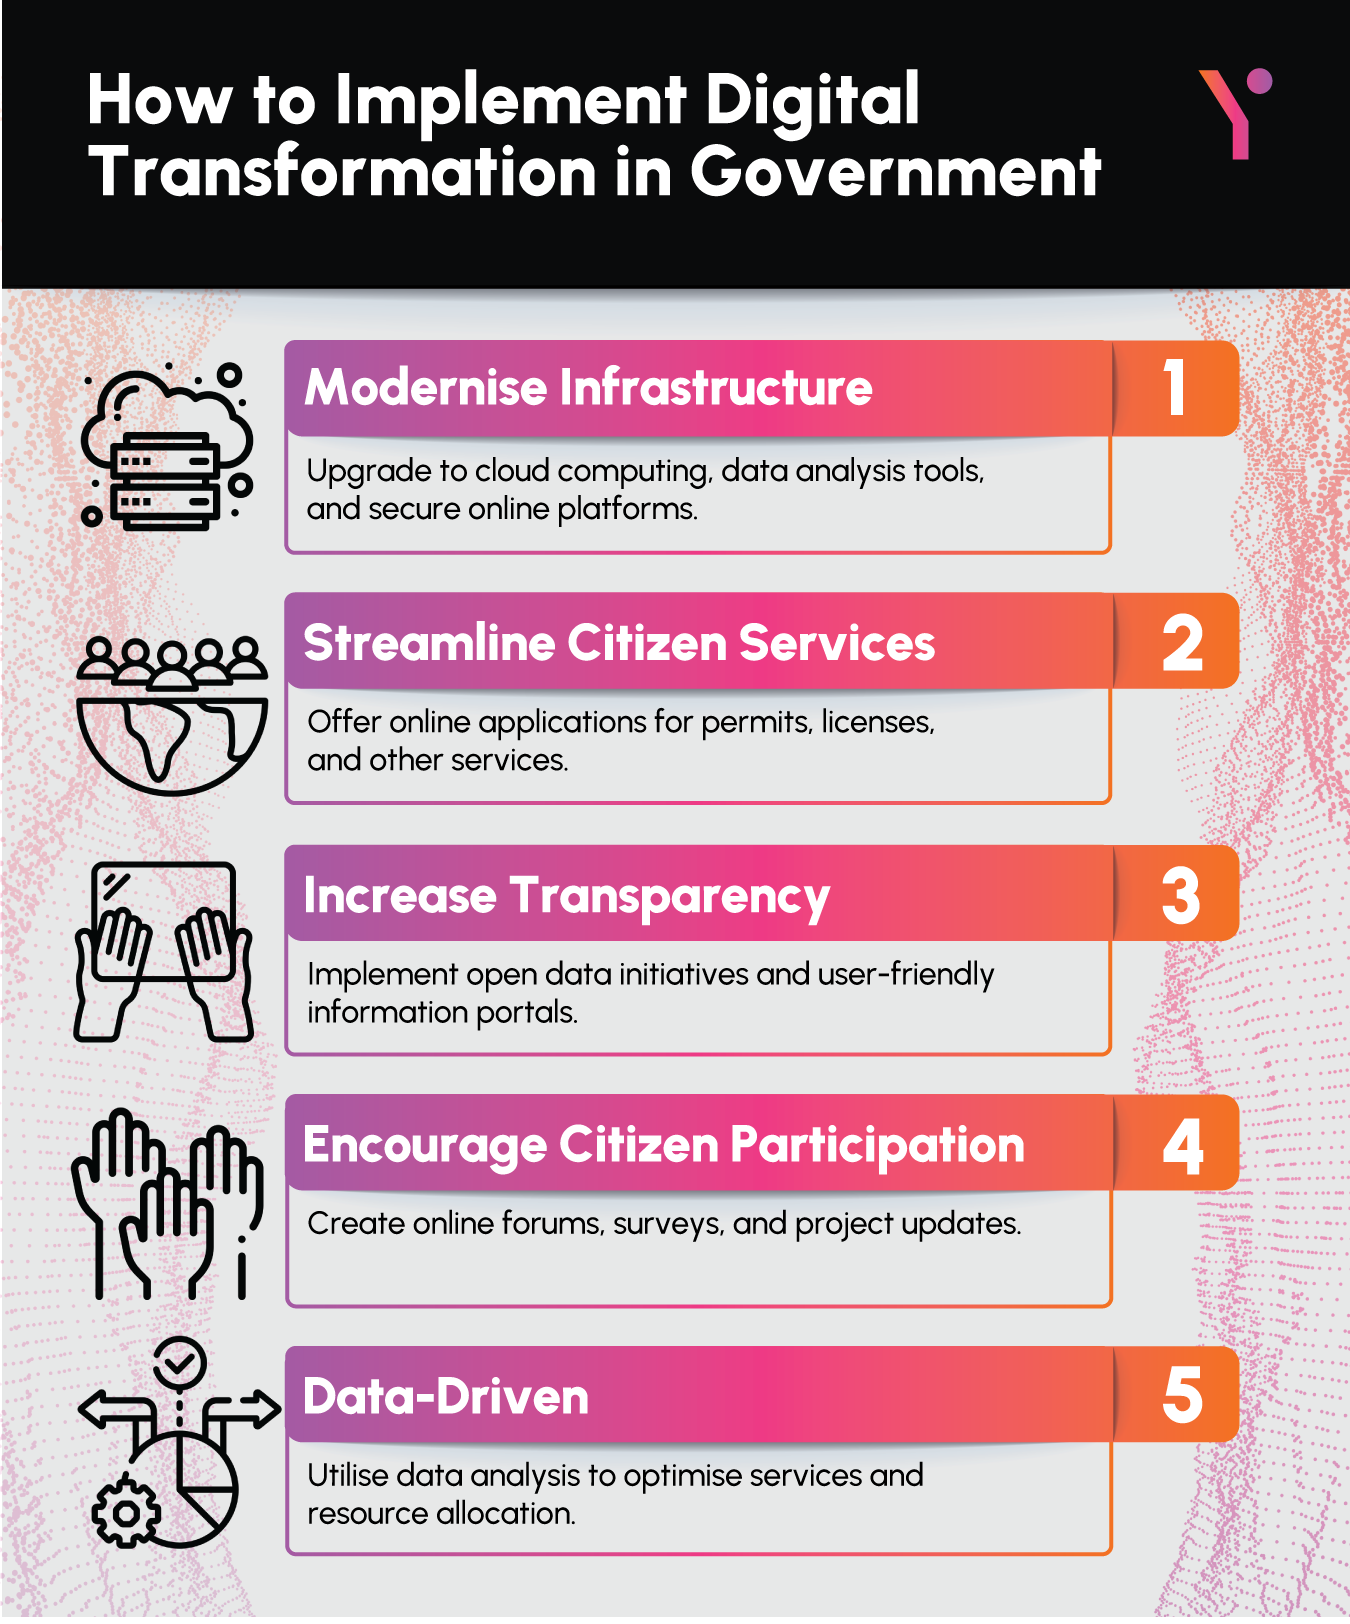 key pointers on how to implement digital transformation in Government organization in pictorial form